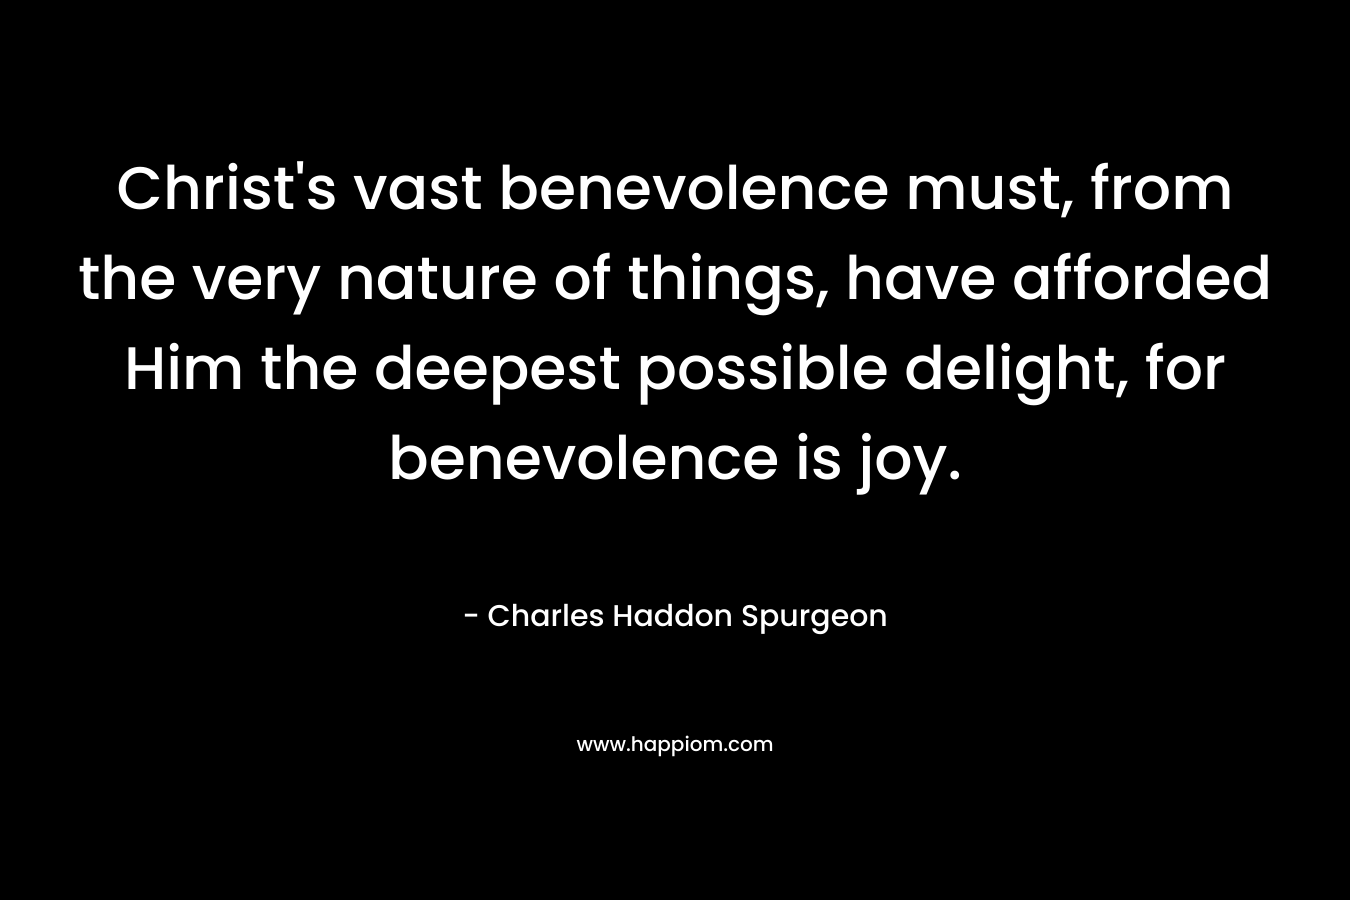 Christ’s vast benevolence must, from the very nature of things, have afforded Him the deepest possible delight, for benevolence is joy. – Charles Haddon Spurgeon